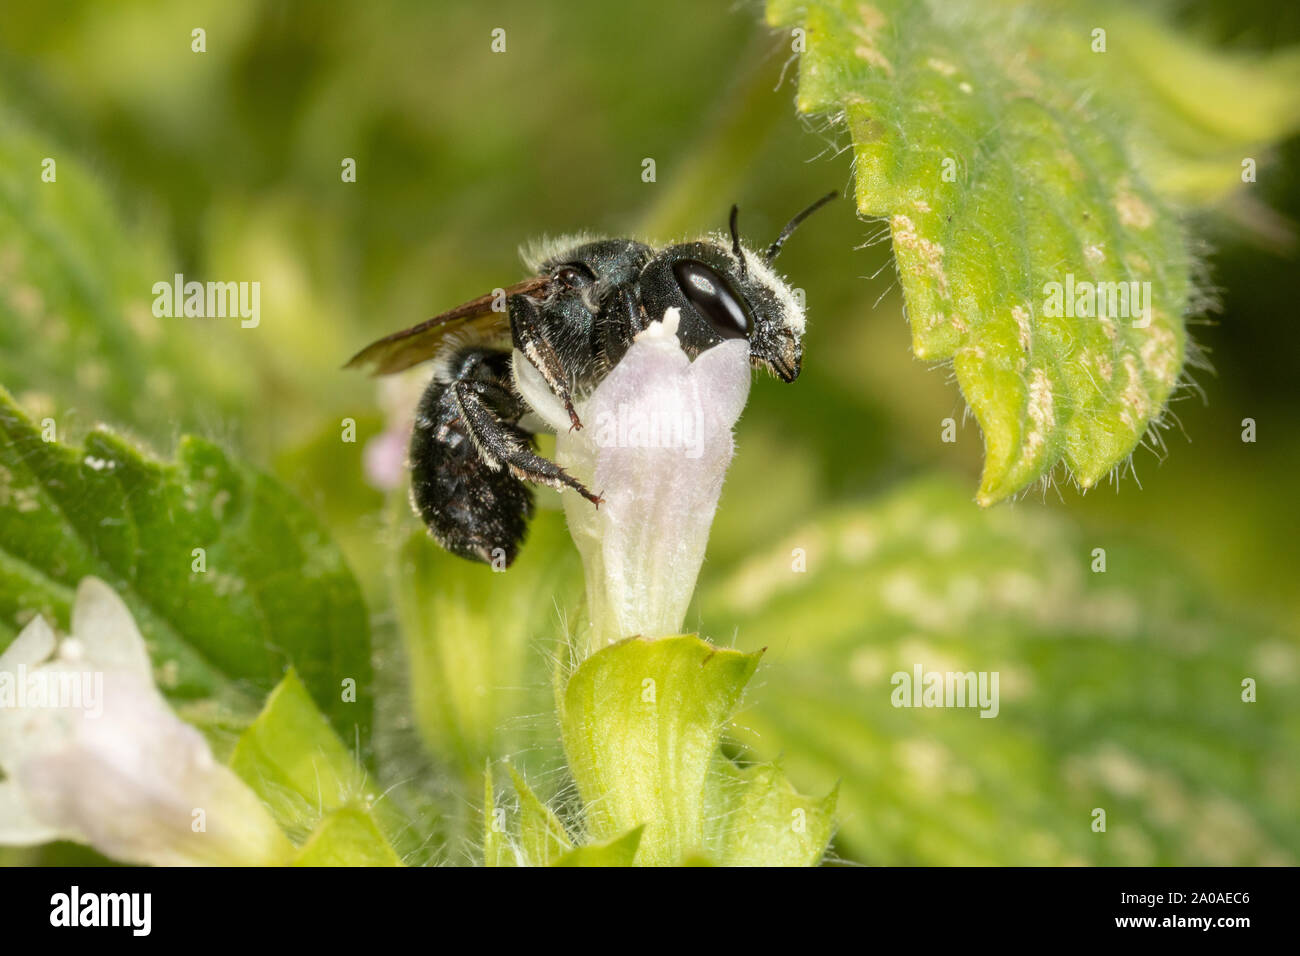 Female blue mason bee with pollen on her head, showing how solitary bees are under-appreciated, economically important insects. Stock Photo